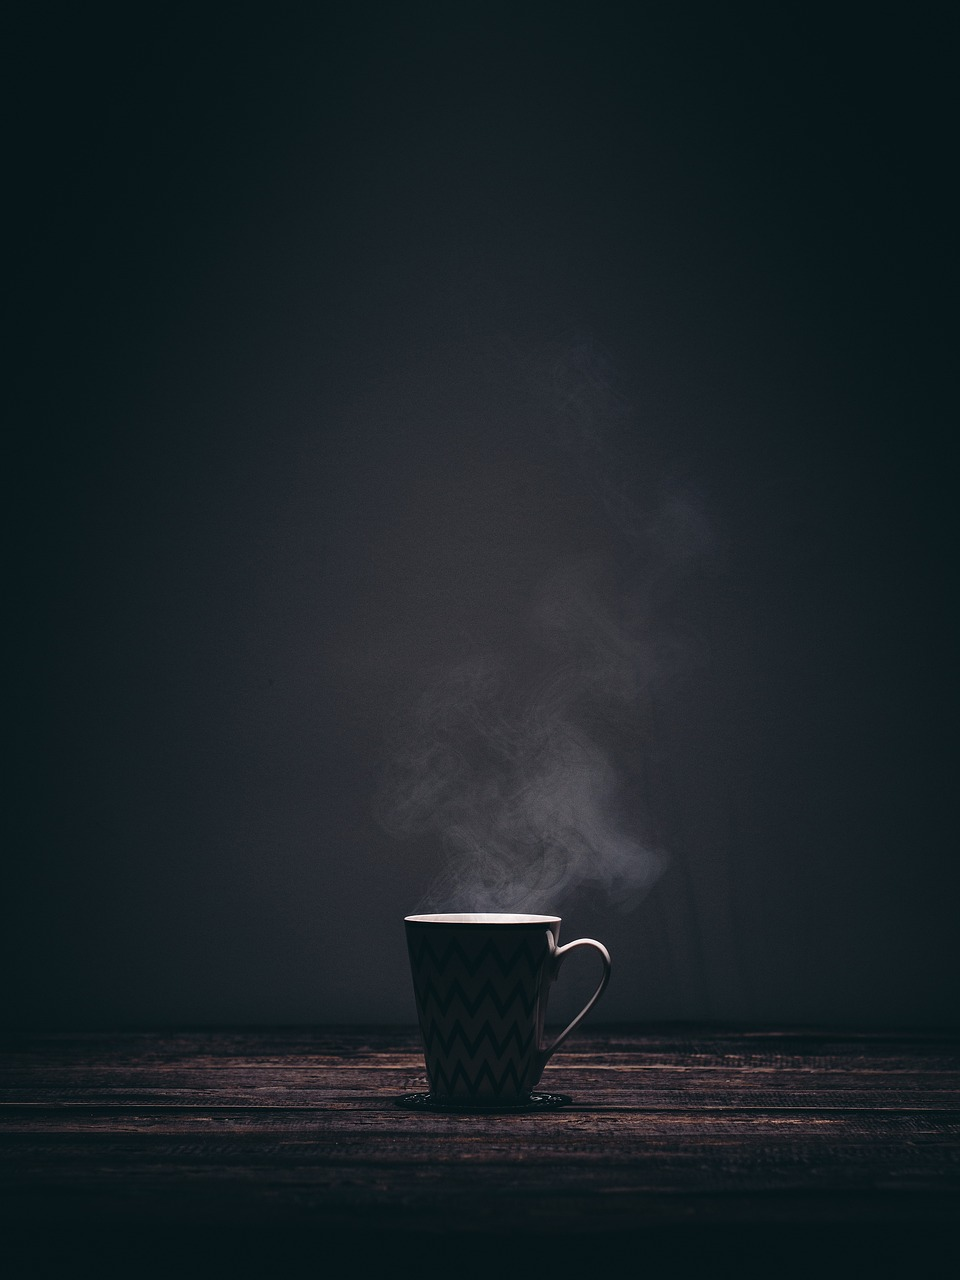 An image of a steaming cup of tea on a dark background.